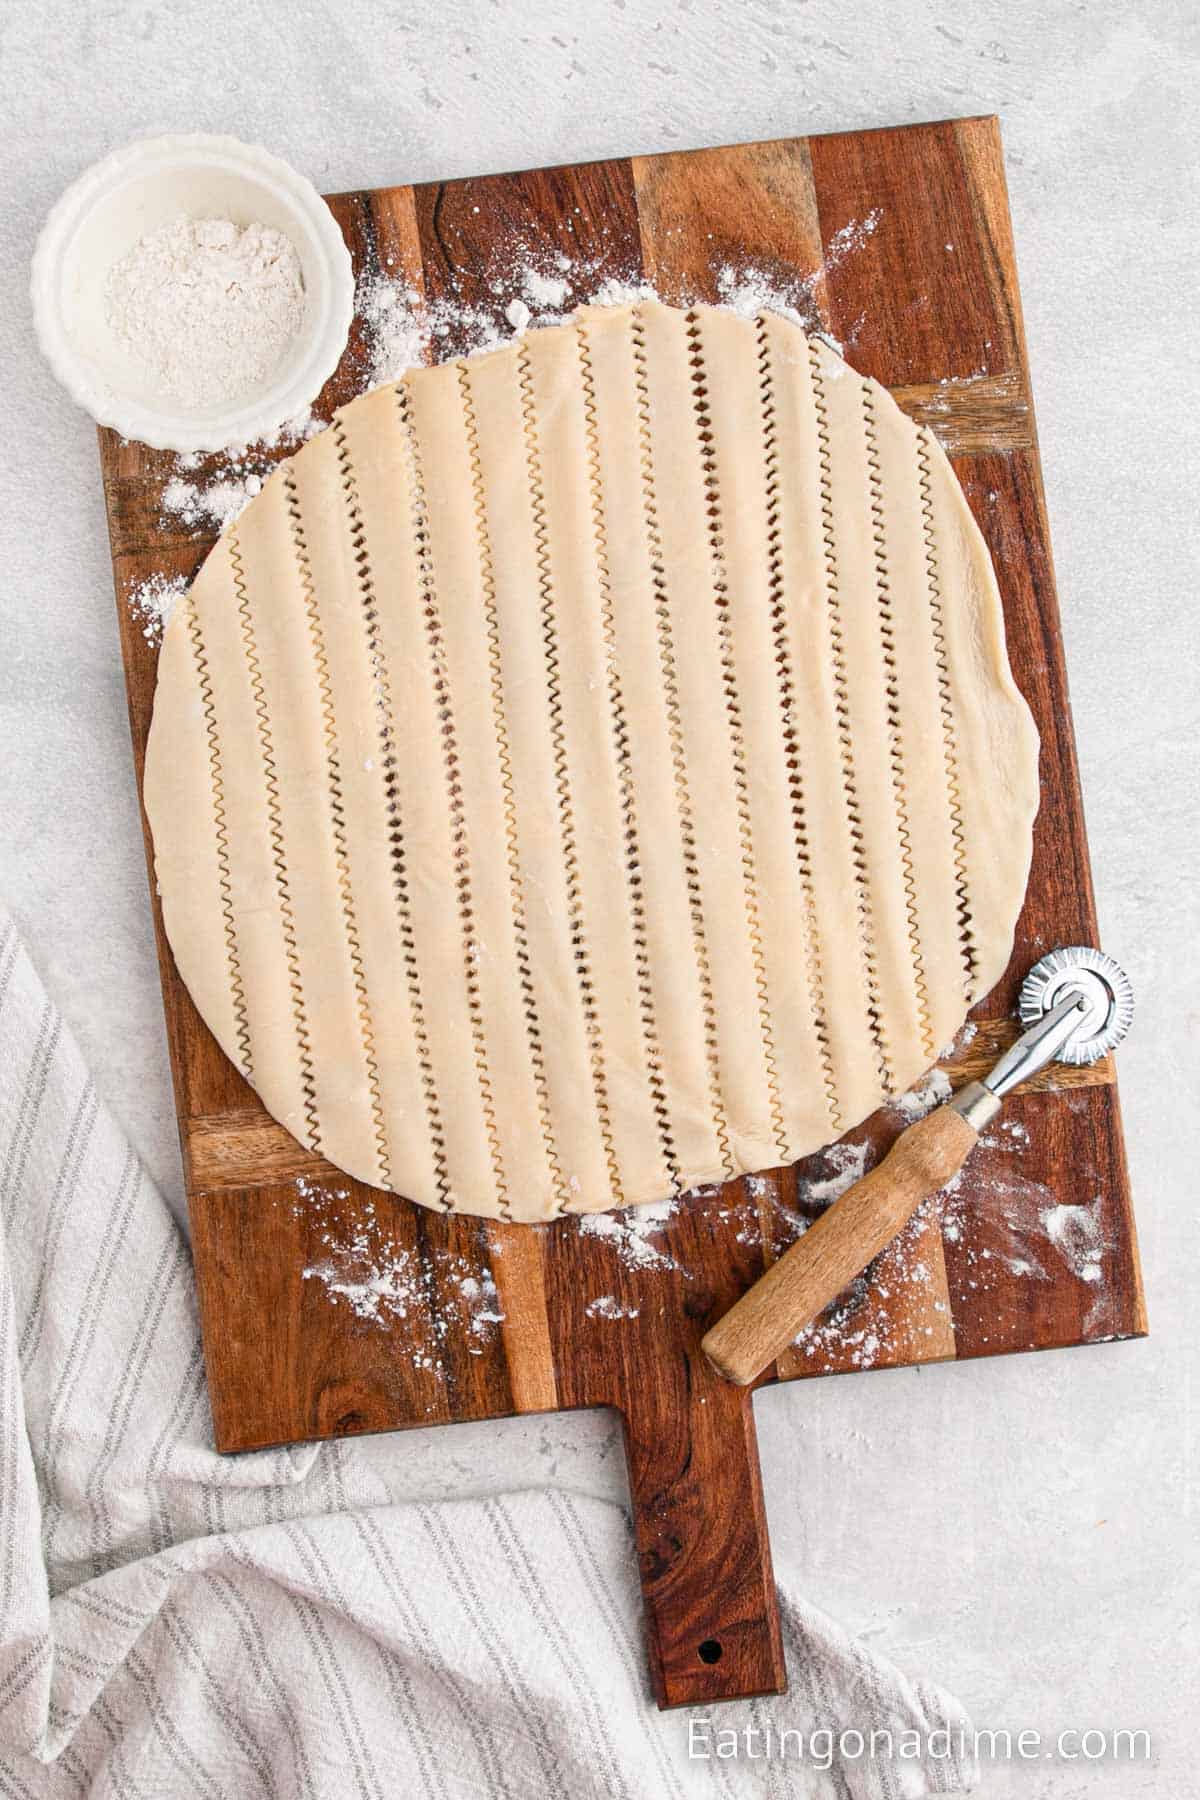 Cutting other pie crust into strips on a cutting board